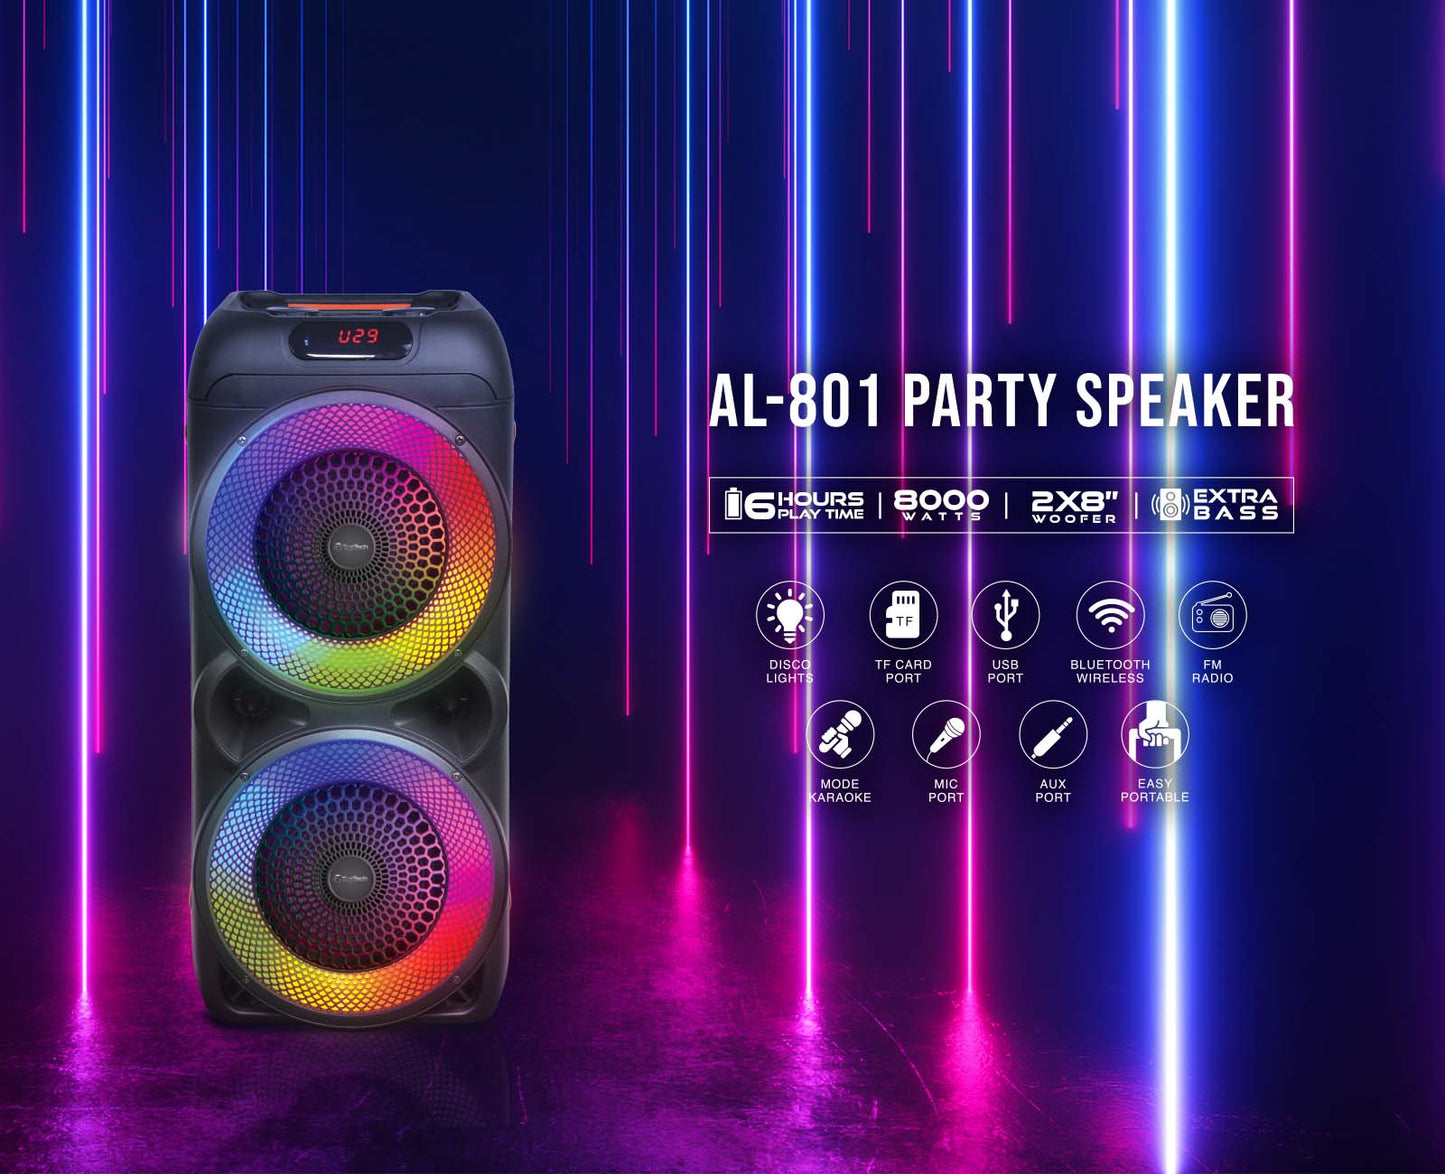 TOPTECH AL-801,  2x8 Inch Wireless Bluetooth Speaker with 360 HiFi Surround Sound System and Extra Bass, Flashing Dynamic LED Lights, Handle and Wheels for Easy Transport, Up to 10 Meters (33ft) Bluetooth Distance,  for Party Outdoor Game Camping Gifts